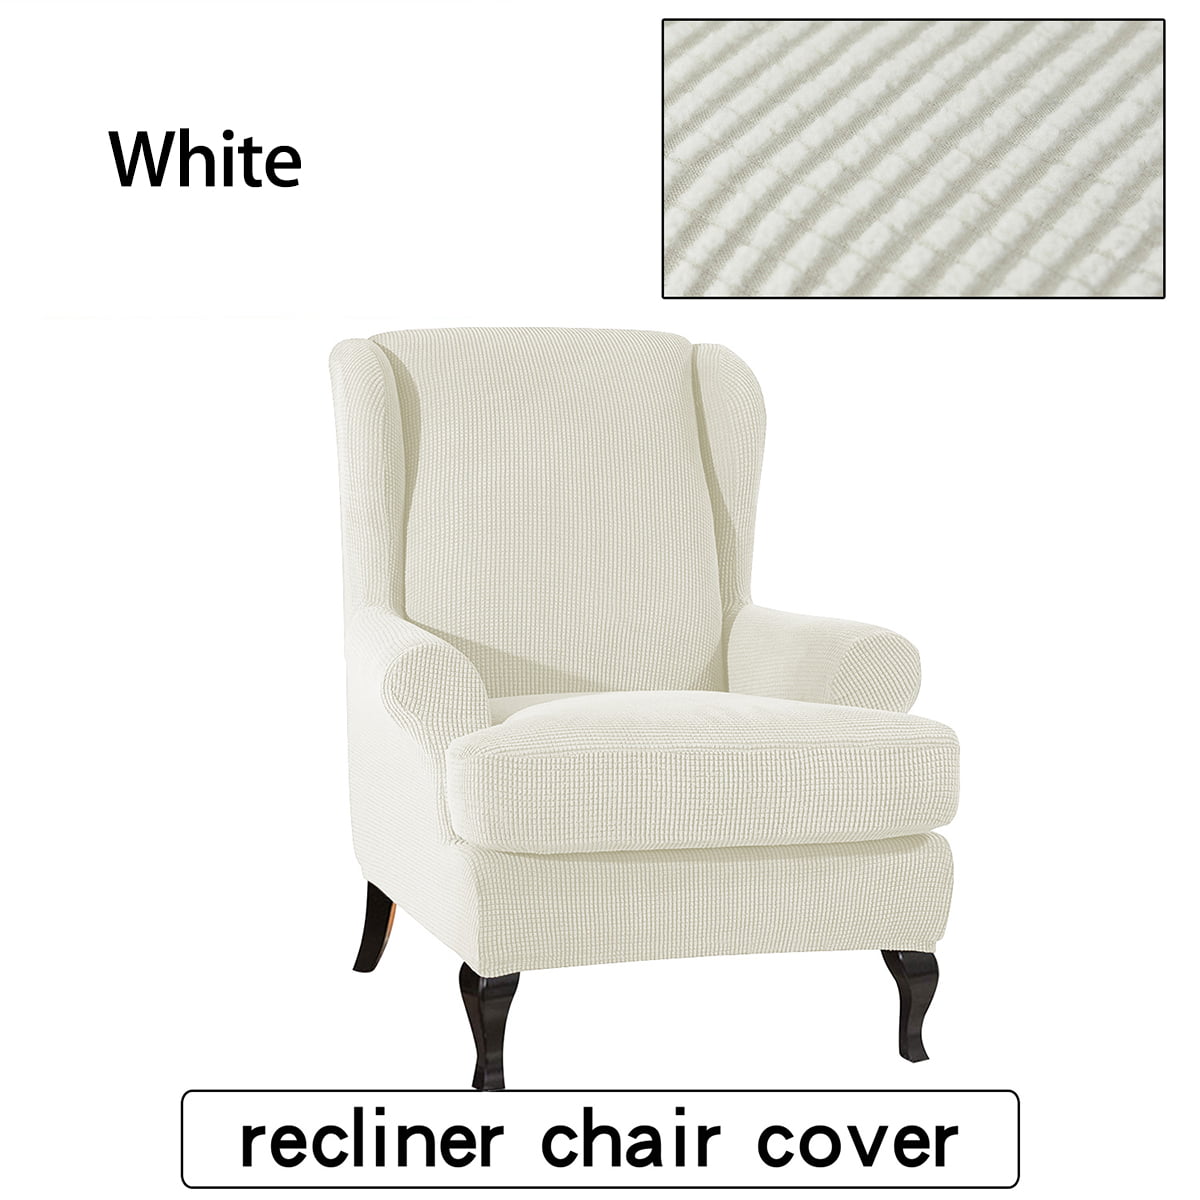 2 Piece Stretch Wingback Slipcover Jacquard Spandex Waffle Fabric T Cushion Wing Chair Cover Furniture Protector Covers Walmart Com Walmart Com